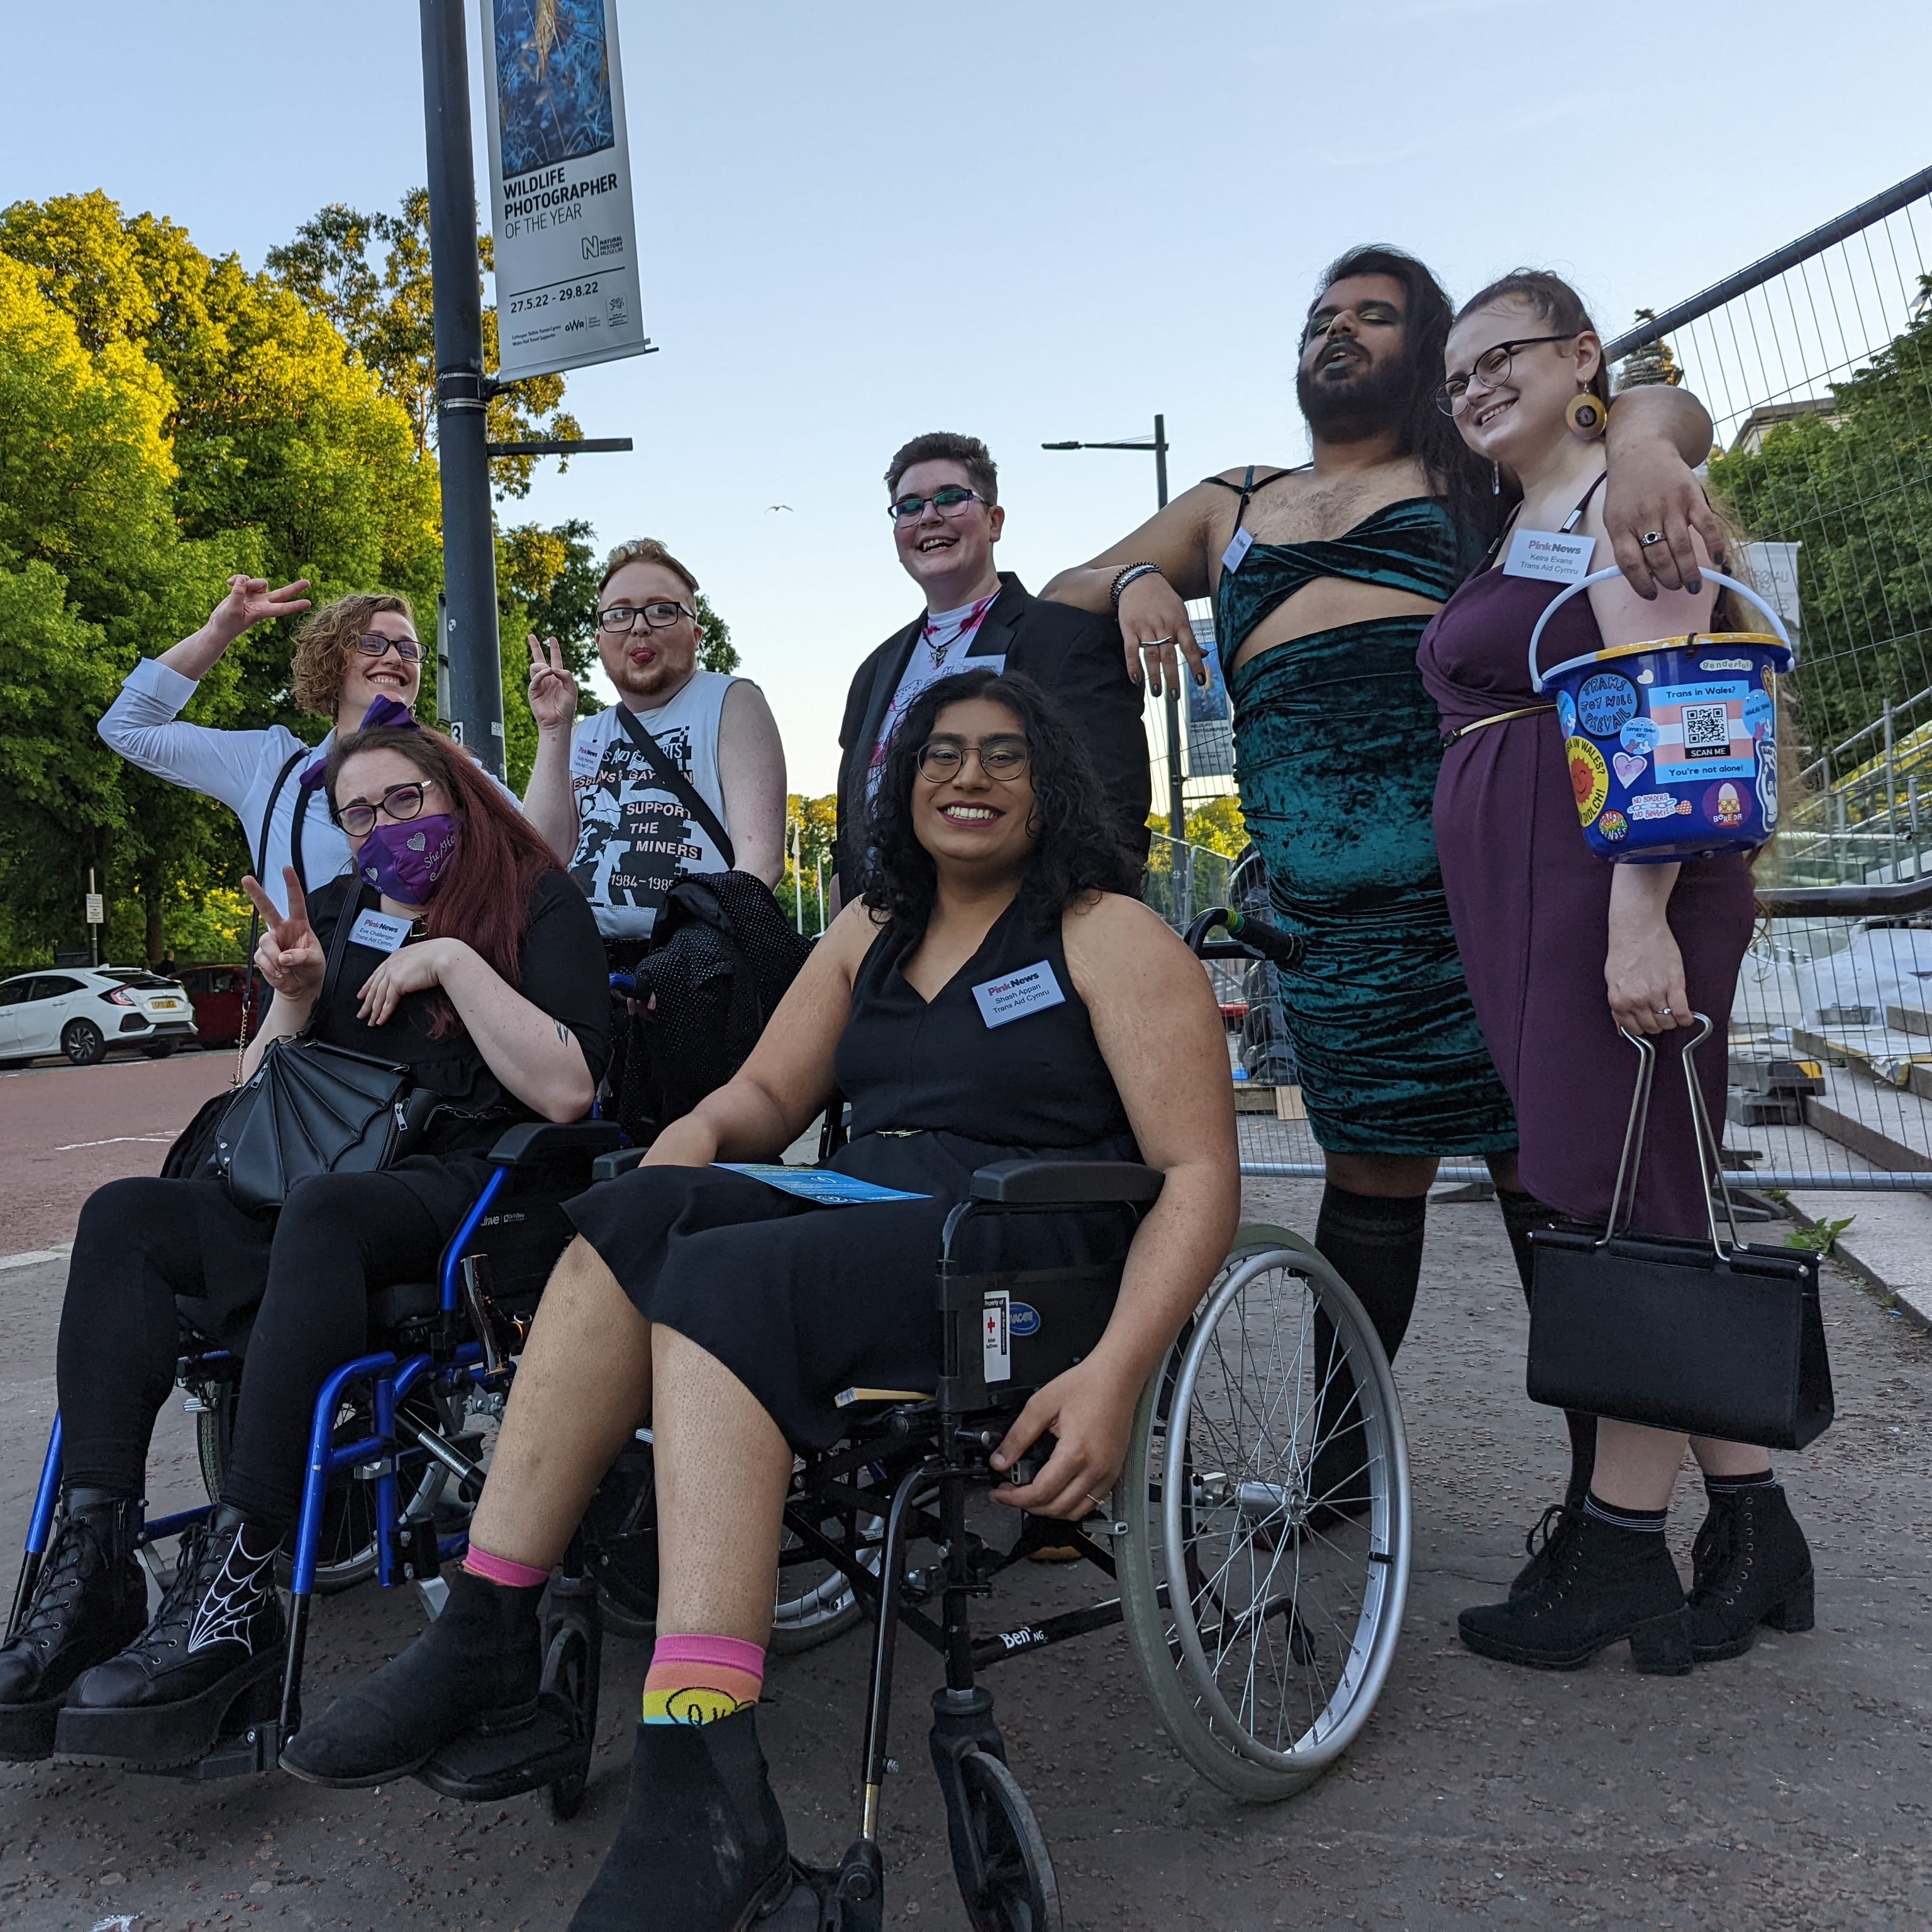 people dressed glamorously, with 2 in wheelchairs, posing for a photo outside the venue